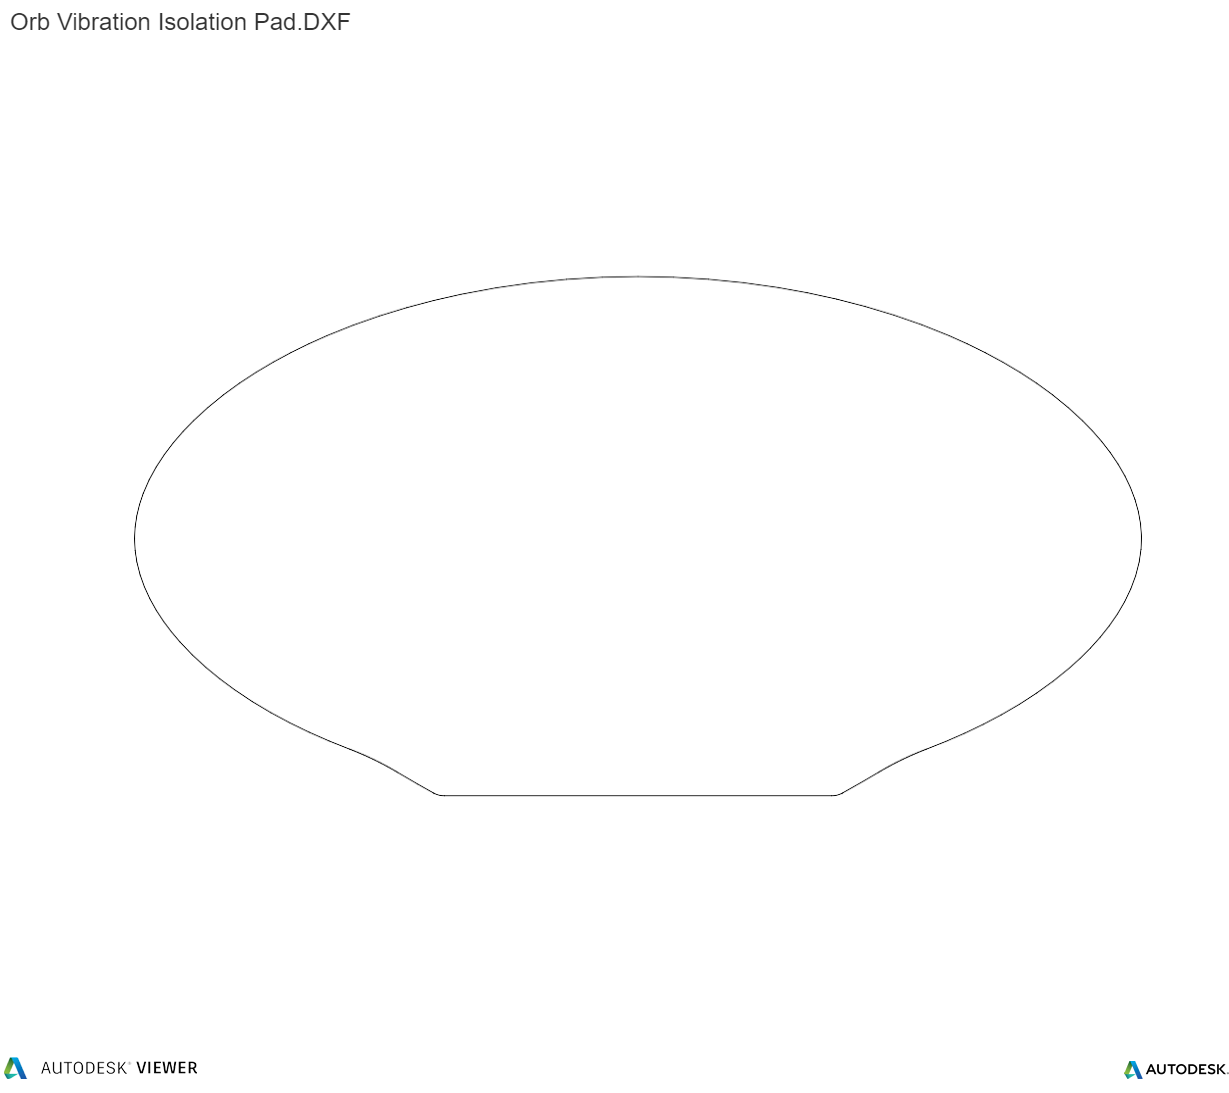 Orb_Vibration_Isolation_Pad.DXF.png